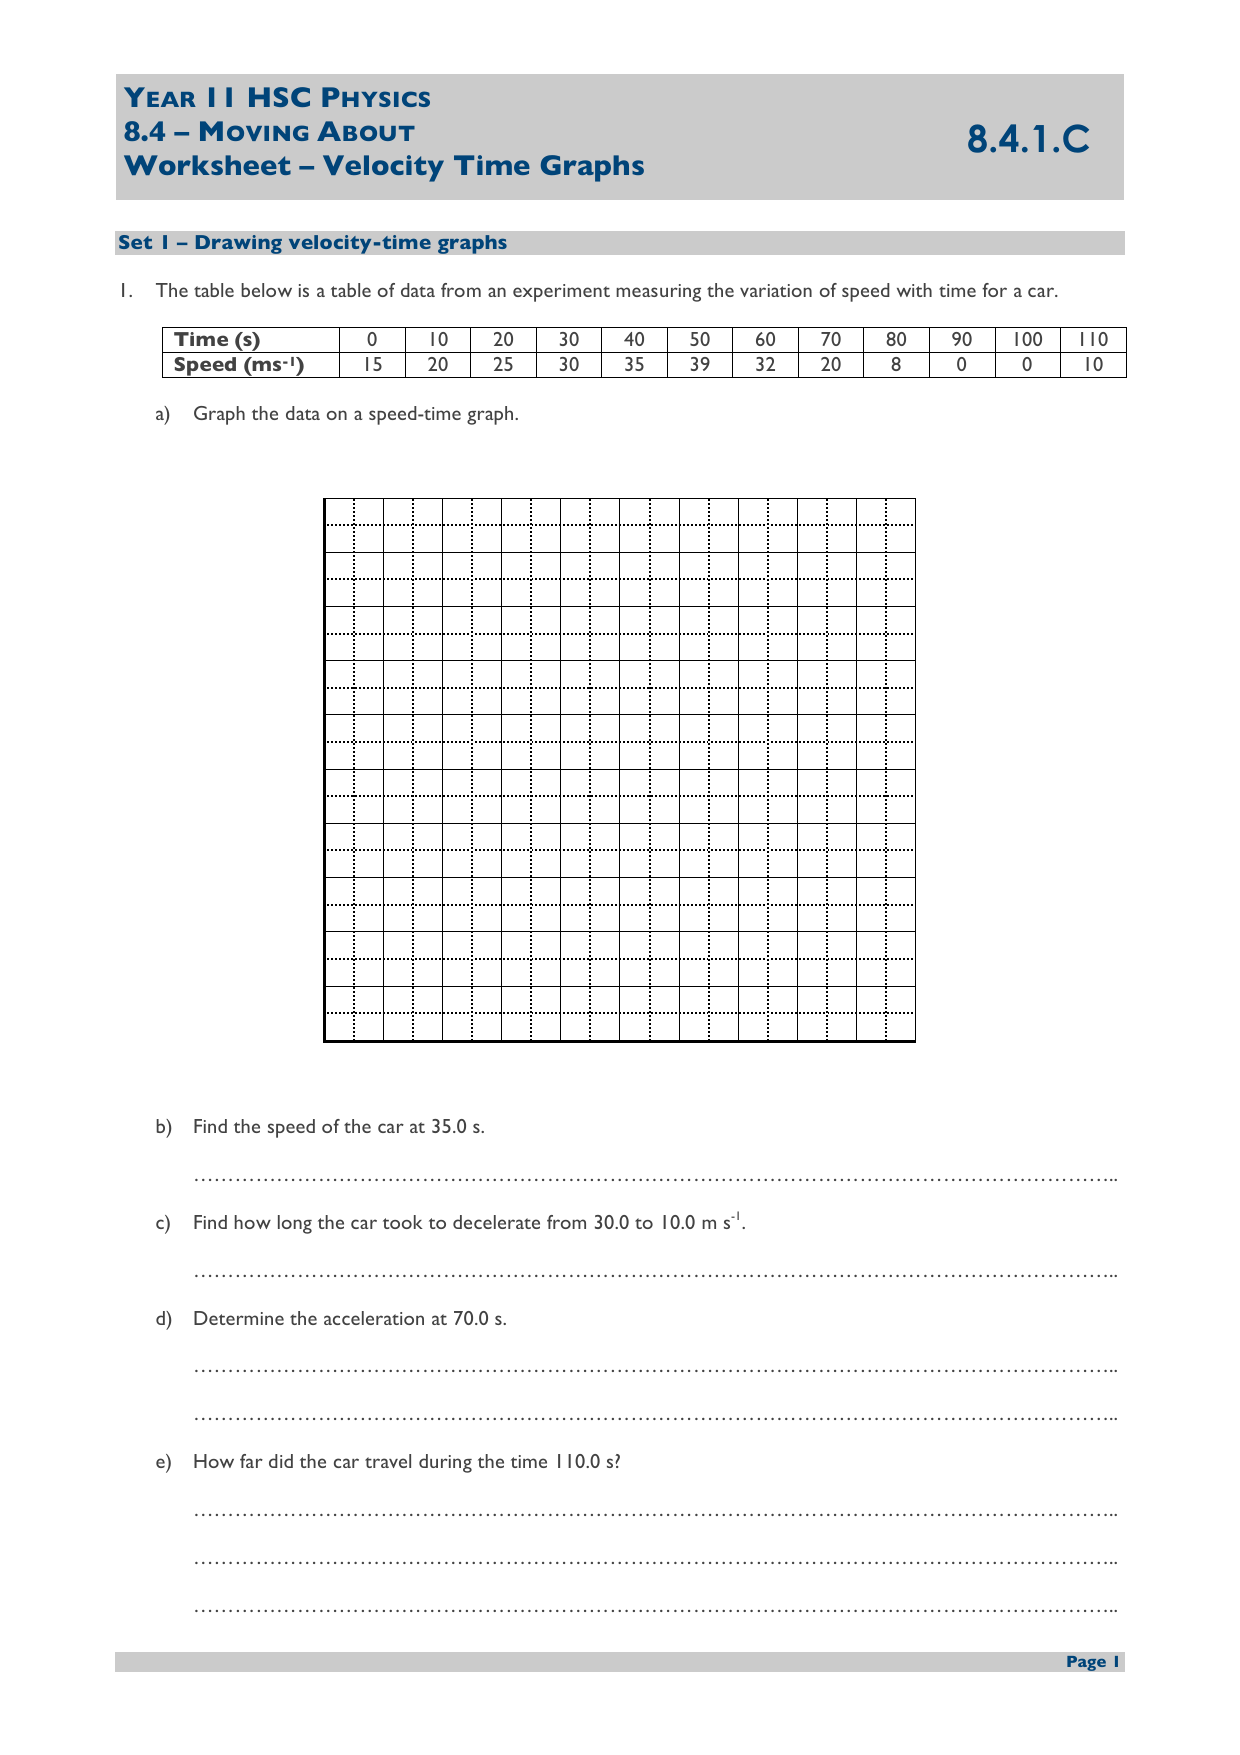 Velocity time graphs 11.11.11019 Intended For Velocity Time Graph Worksheet Answers